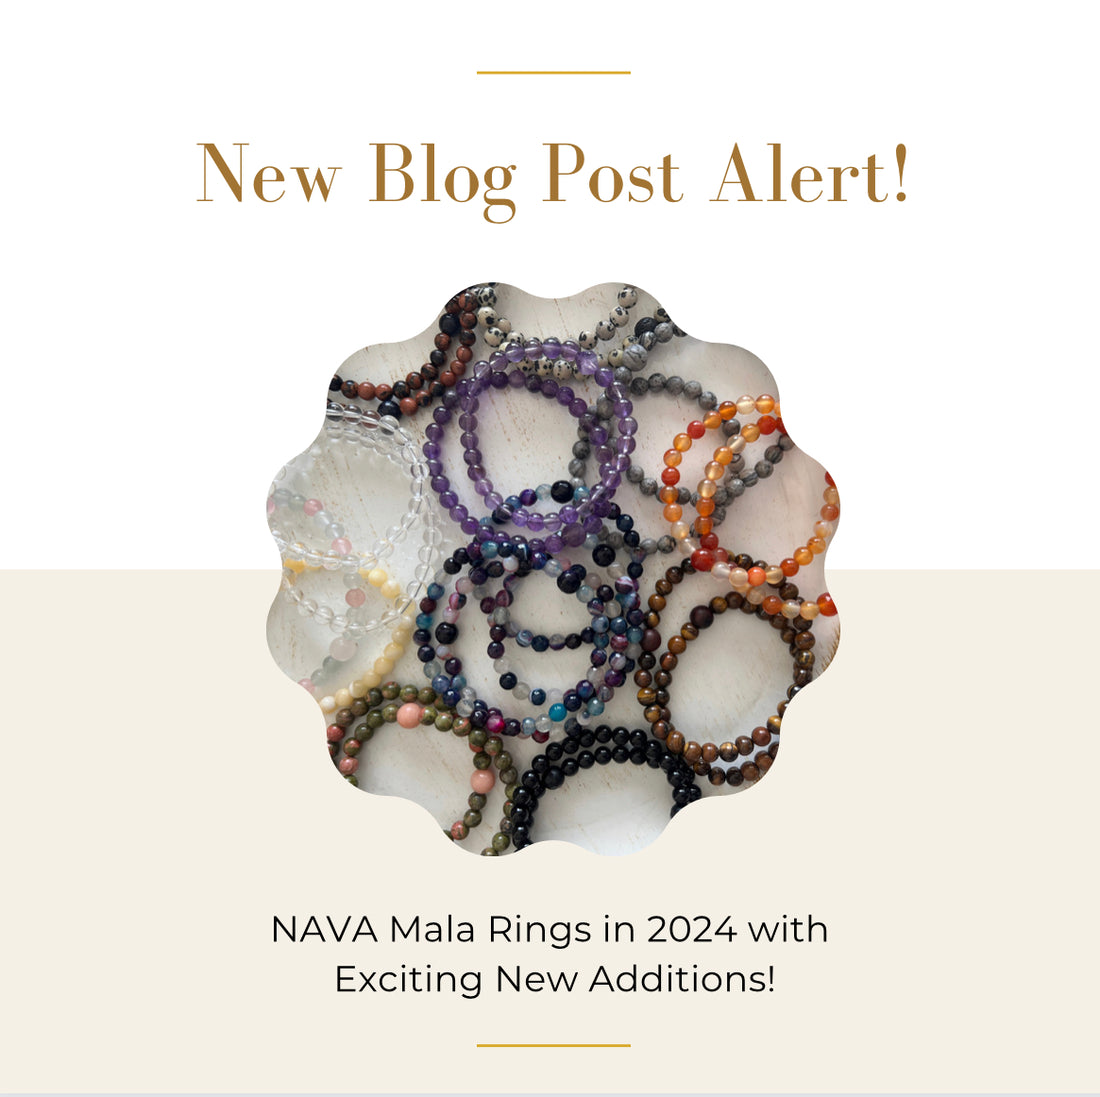 NAVA Mala Rings in 2024 with Exciting New Additions!